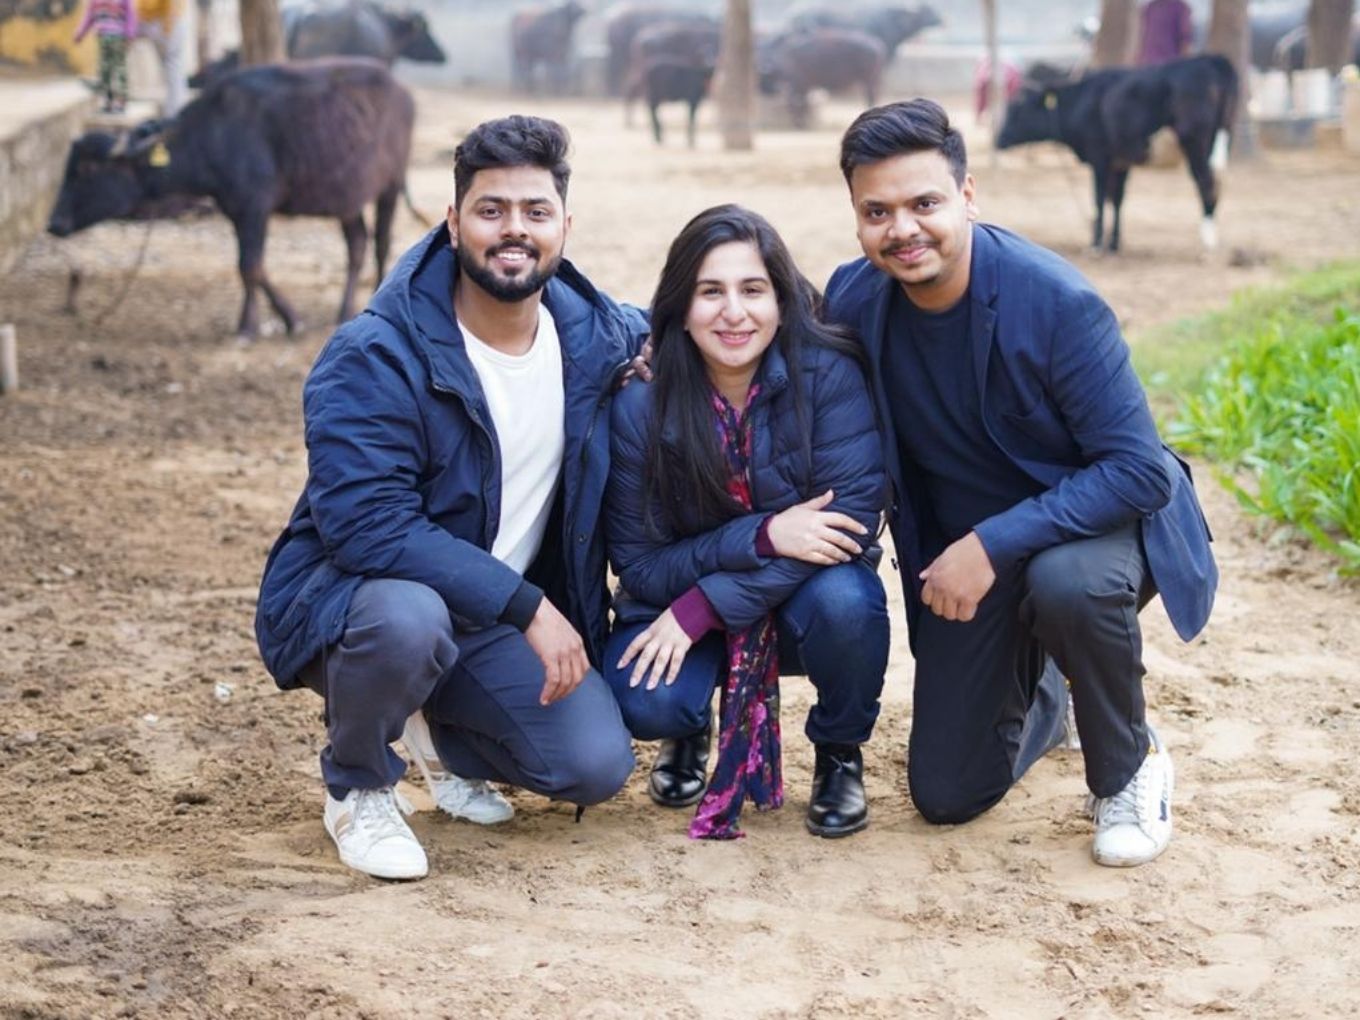 Dairytech Startup MoooFarm Raises Funding From Accel To Help Small-Scale Dairy Farmers Summary MoooFarm connects small-scale dairy farmers to high-yielding cattle qualified veterinarians, insurance and financial services and digital advisory services The MoooFarm app has over a million downloads on the Google Play Store India is the largest producer of milk in the world and it is the largest single agricultural commodity with a 4% share in the economy Dairytech startup MoooFarm has raised $2.4 Mn in a seed funding round led by Accel India. Rockstart’s AgriFood fund and Navus Ventures also participated in the round.